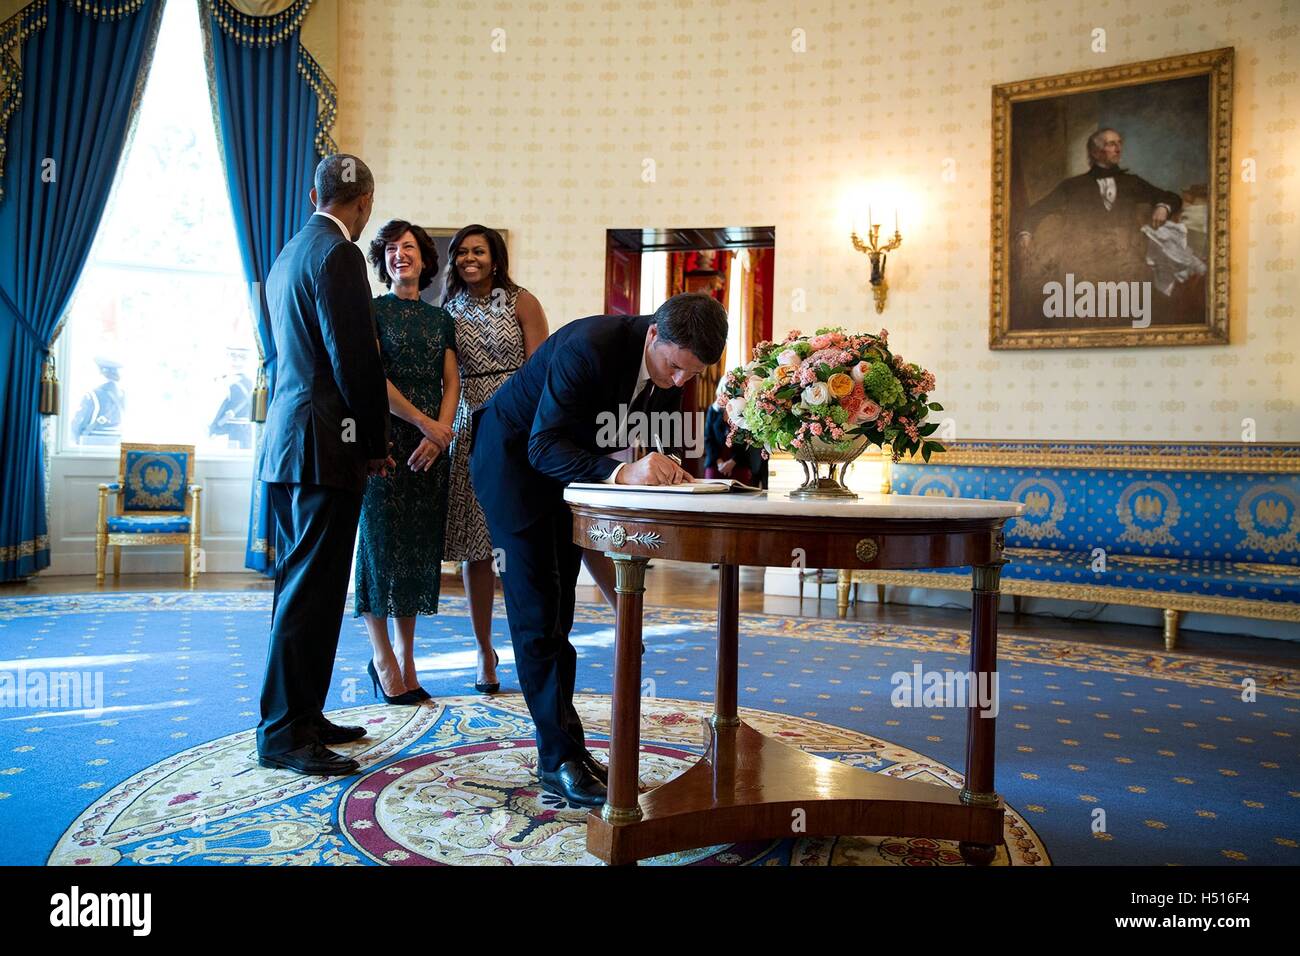 Washington DC, USA. 18th Oct, 2016. Italian Prime Minister Matteo Renzi signs the guest book as his wife Agnese Landini chat with U.S. President Barack Obama and First Lady Michelle Obama in the Blue Room following the State Arrival ceremony at the White House October 18, 2016 in Washington, DC. Credit:  Planetpix/Alamy Live News Stock Photo